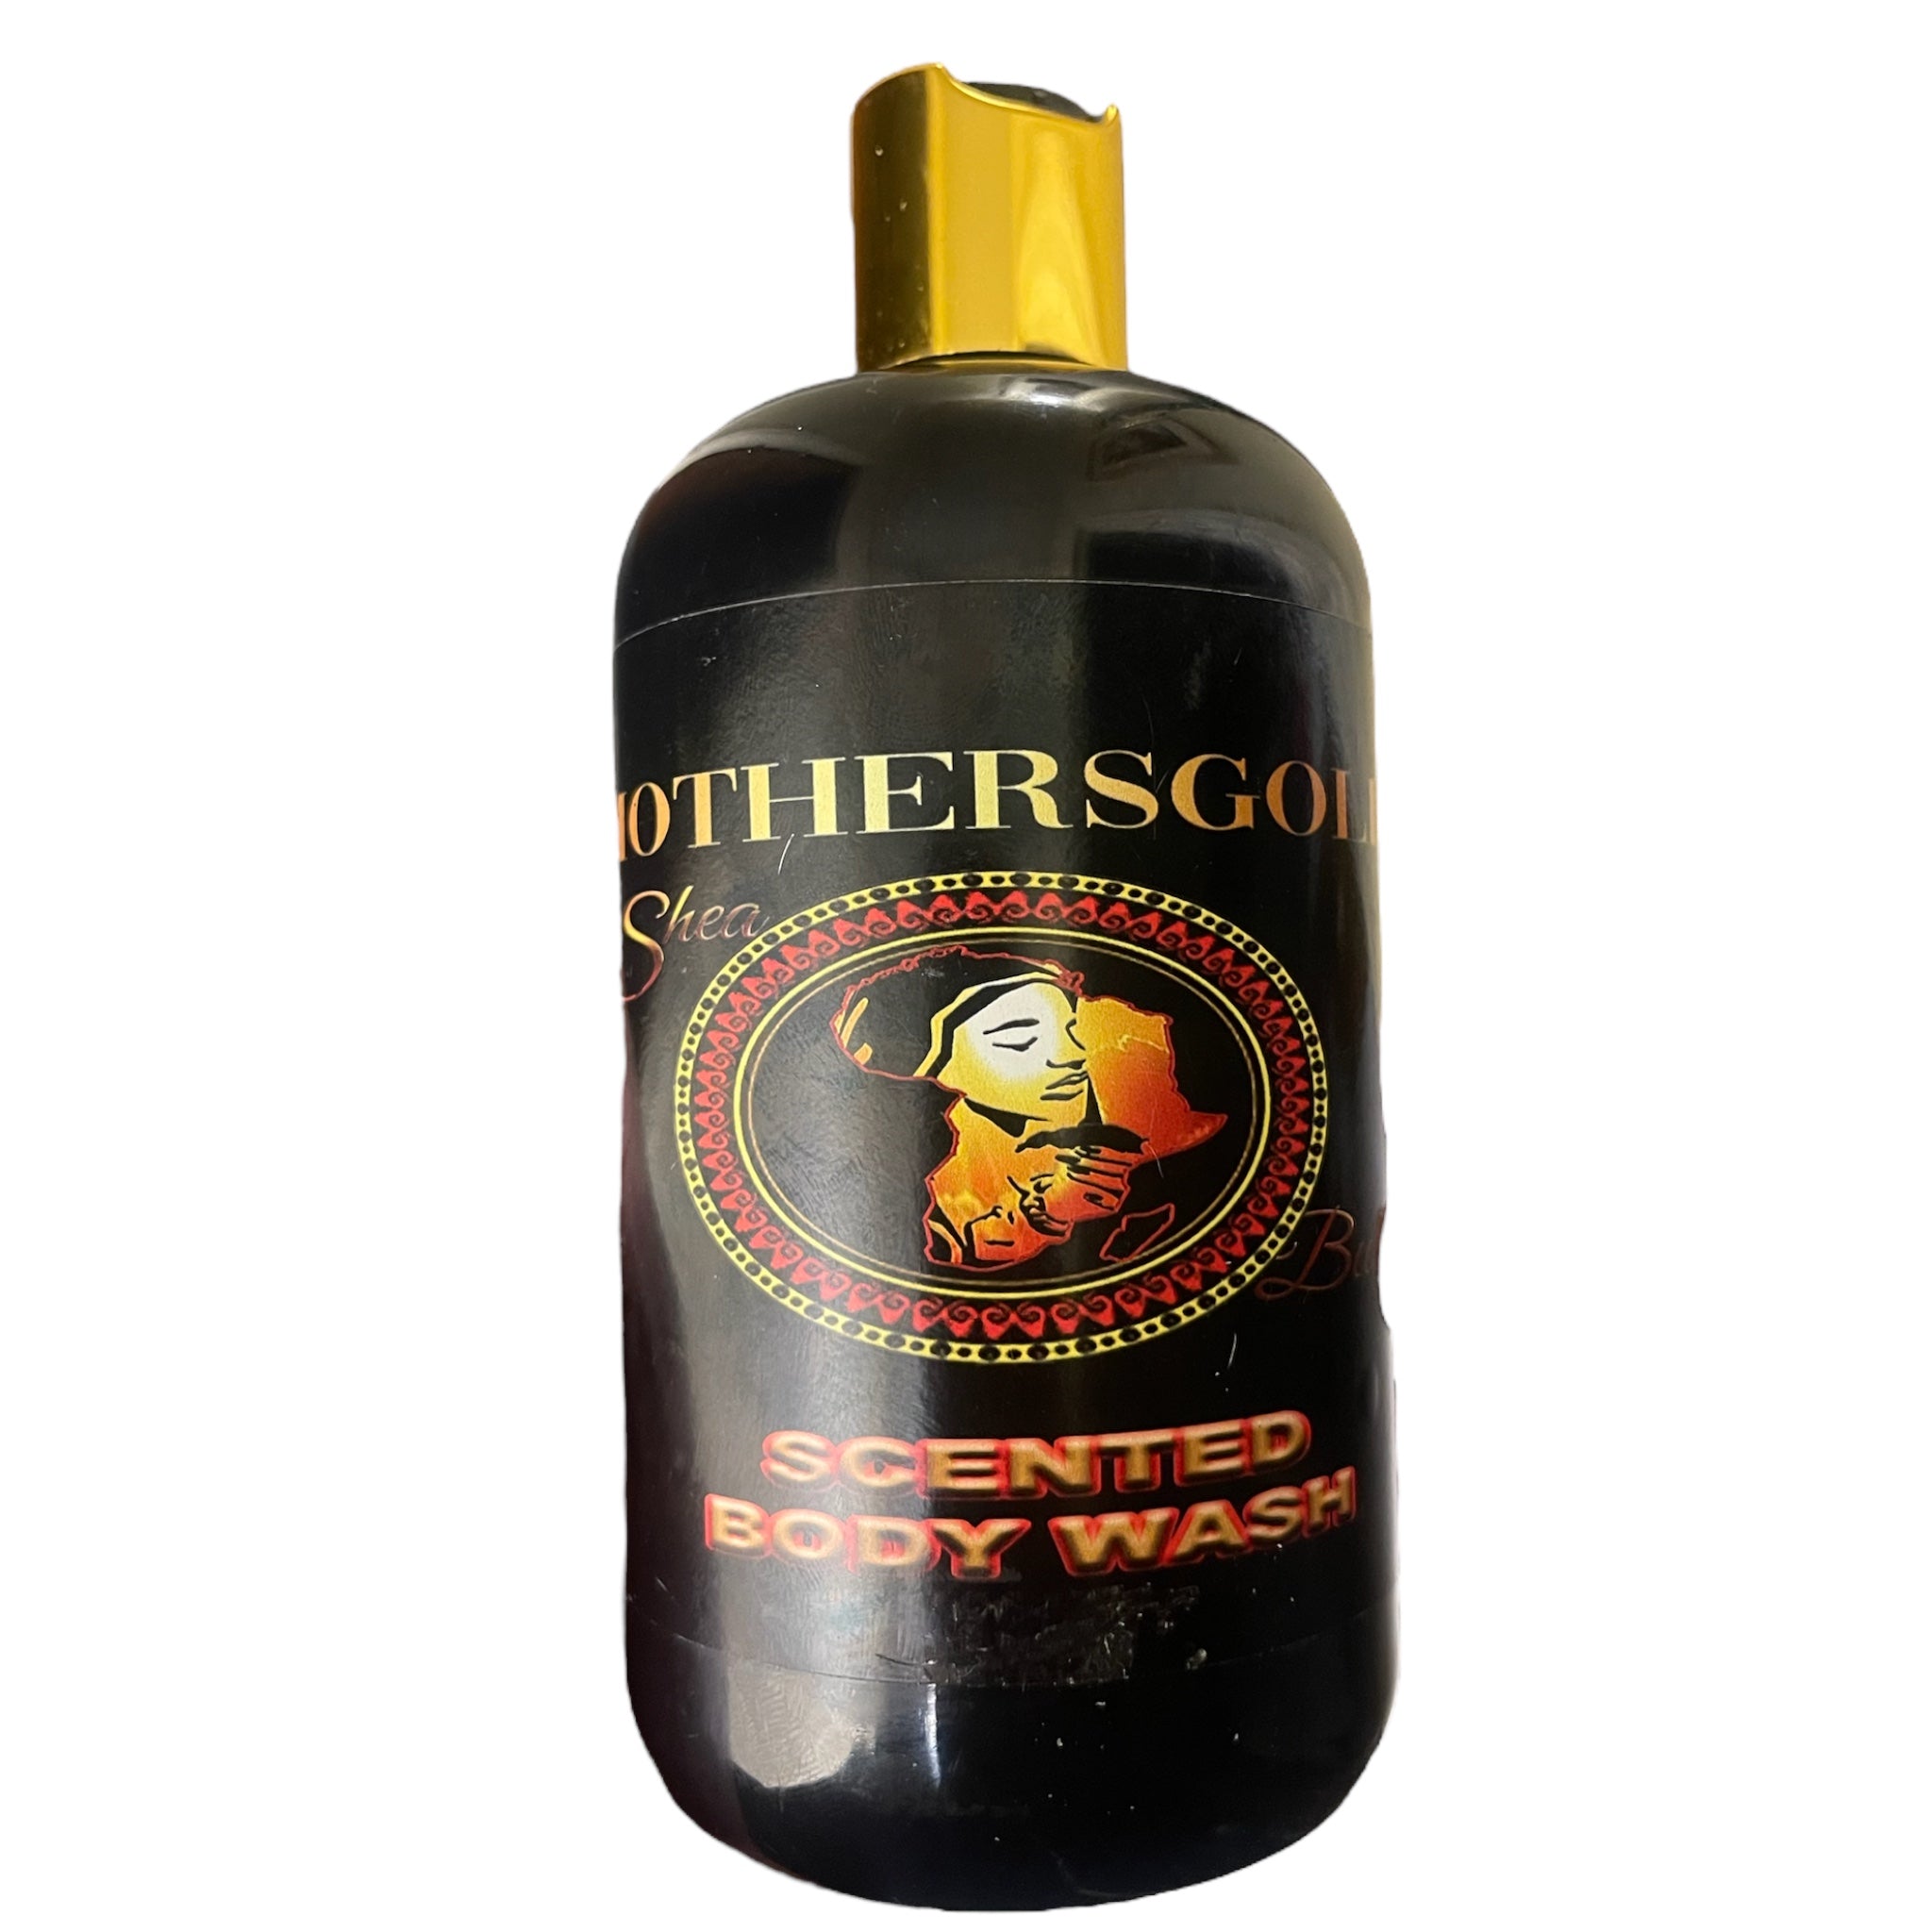 (W) Black Woman (Inspired By Black Woman) Body Wash - Mothersgold